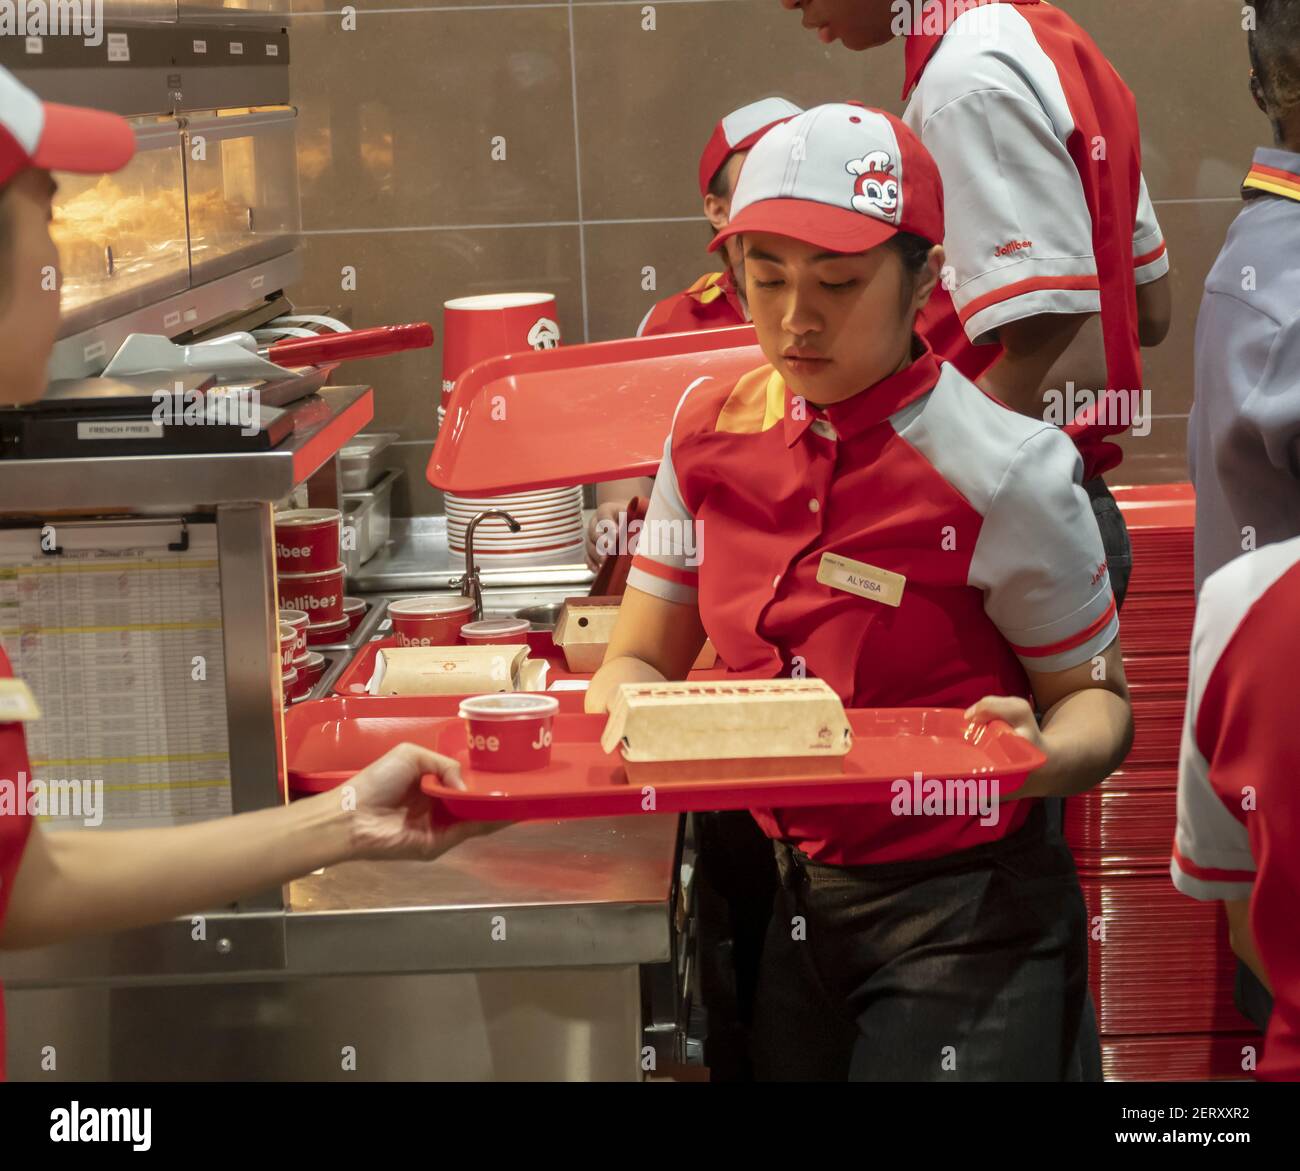 Workers hurry to prepare orders in the Jollibee fast food restaurant in Midtown Manhattan in New York on opening day Saturday, October 27, 2018 . The restaurant chain, which has been dubbed the Philippine McDonald's because of its ubiquity and popularity in the country, opened its first location to Manhattan in the Times Square area. Jollibee Foods Corp., which has plans to open hundreds of stores in the U.S. and Canada also holds a stake in the Smashburger chain. (Photo by Richard B. Levine) Stock Photo